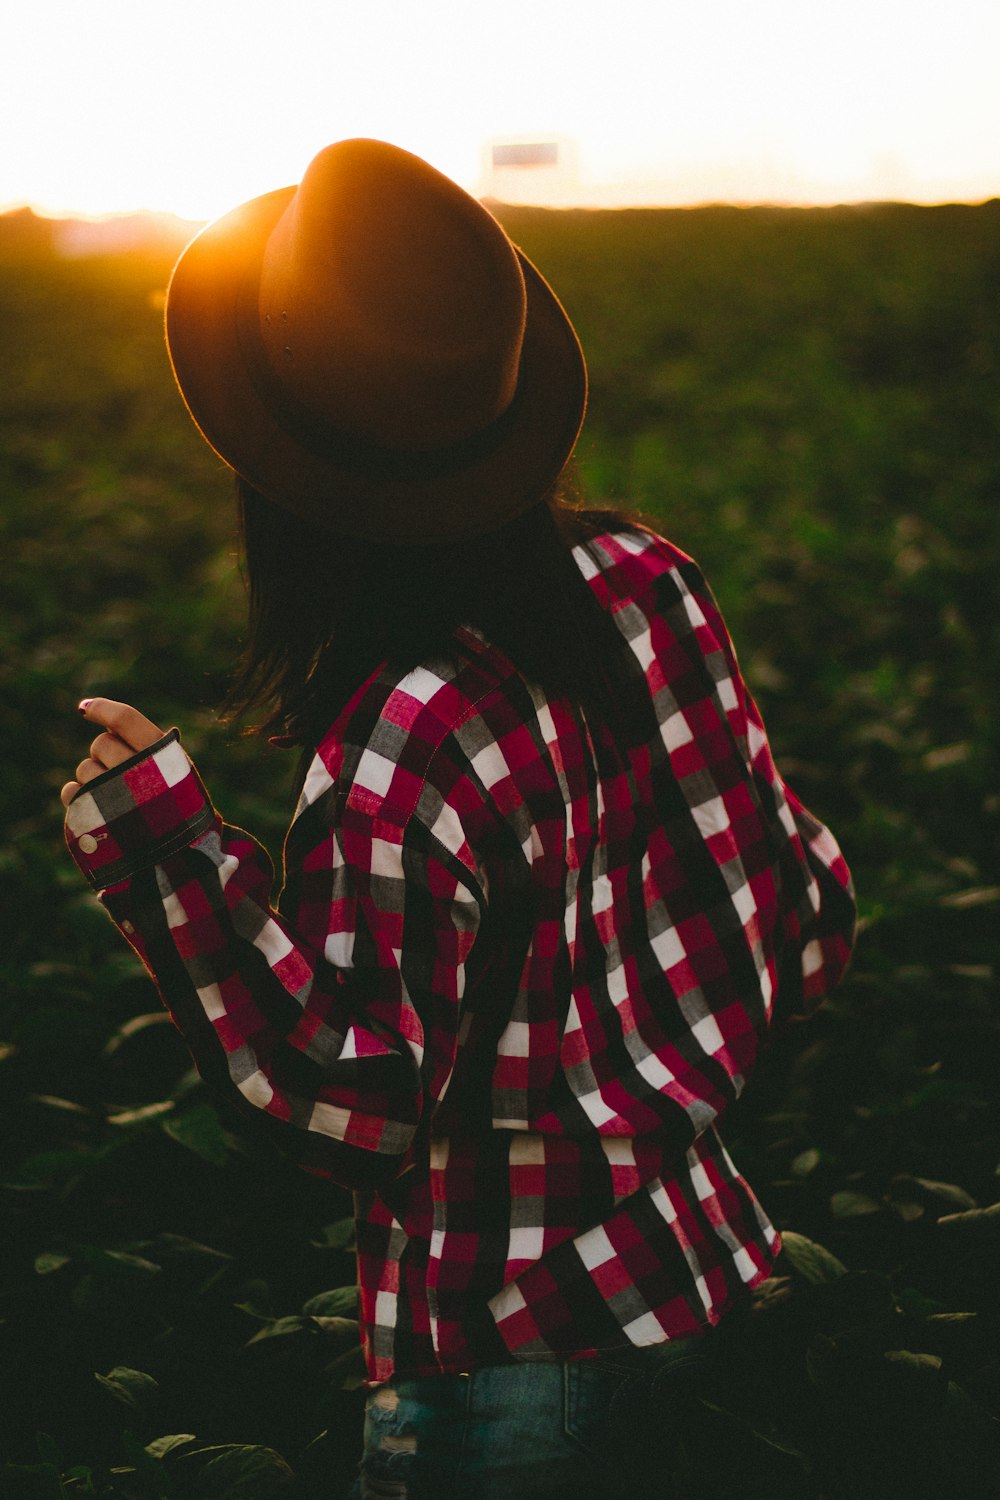 woman wearing hat and checked shirt on green grass